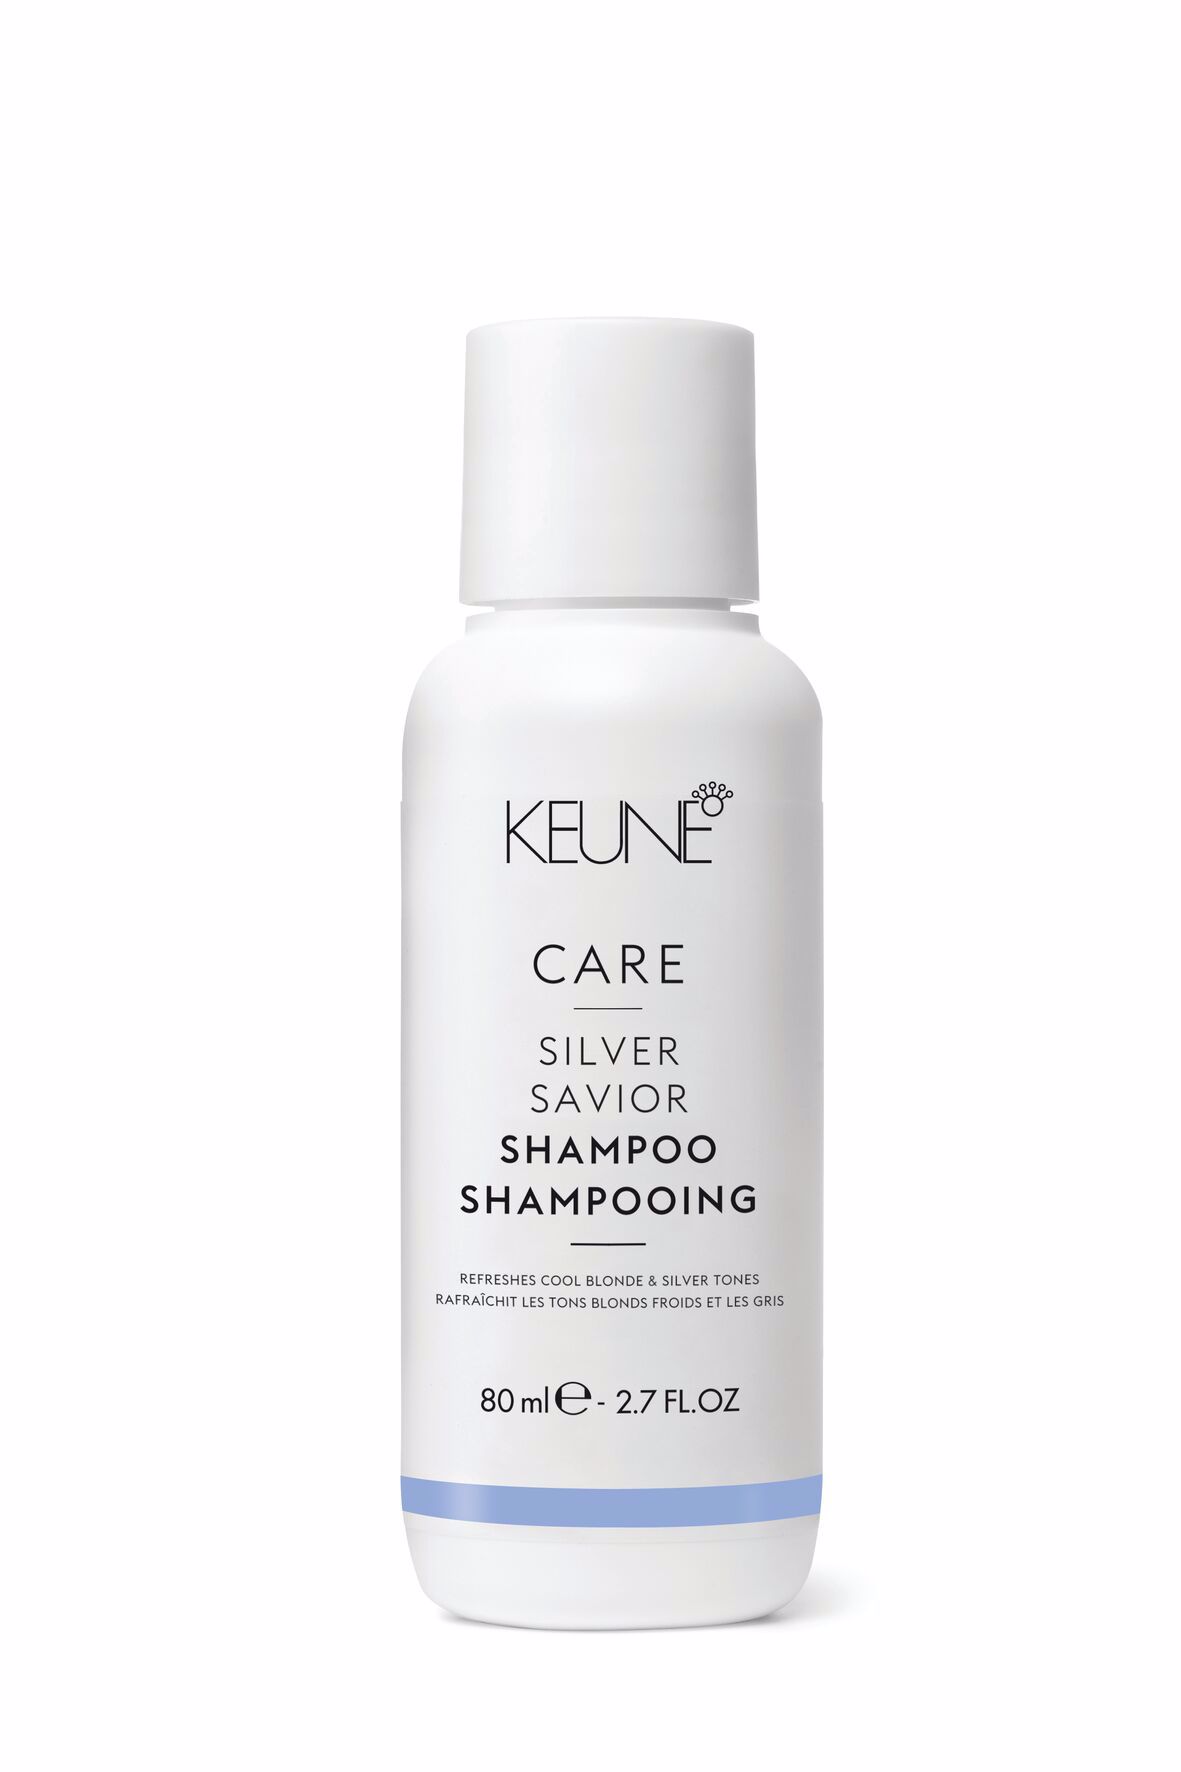 Care Silver Savior Shampoo offers care and color protection for blonde hair. It neutralizes yellow tones and contains Provitamin B5 for smooth hair. Wheat proteins provide additional volume.